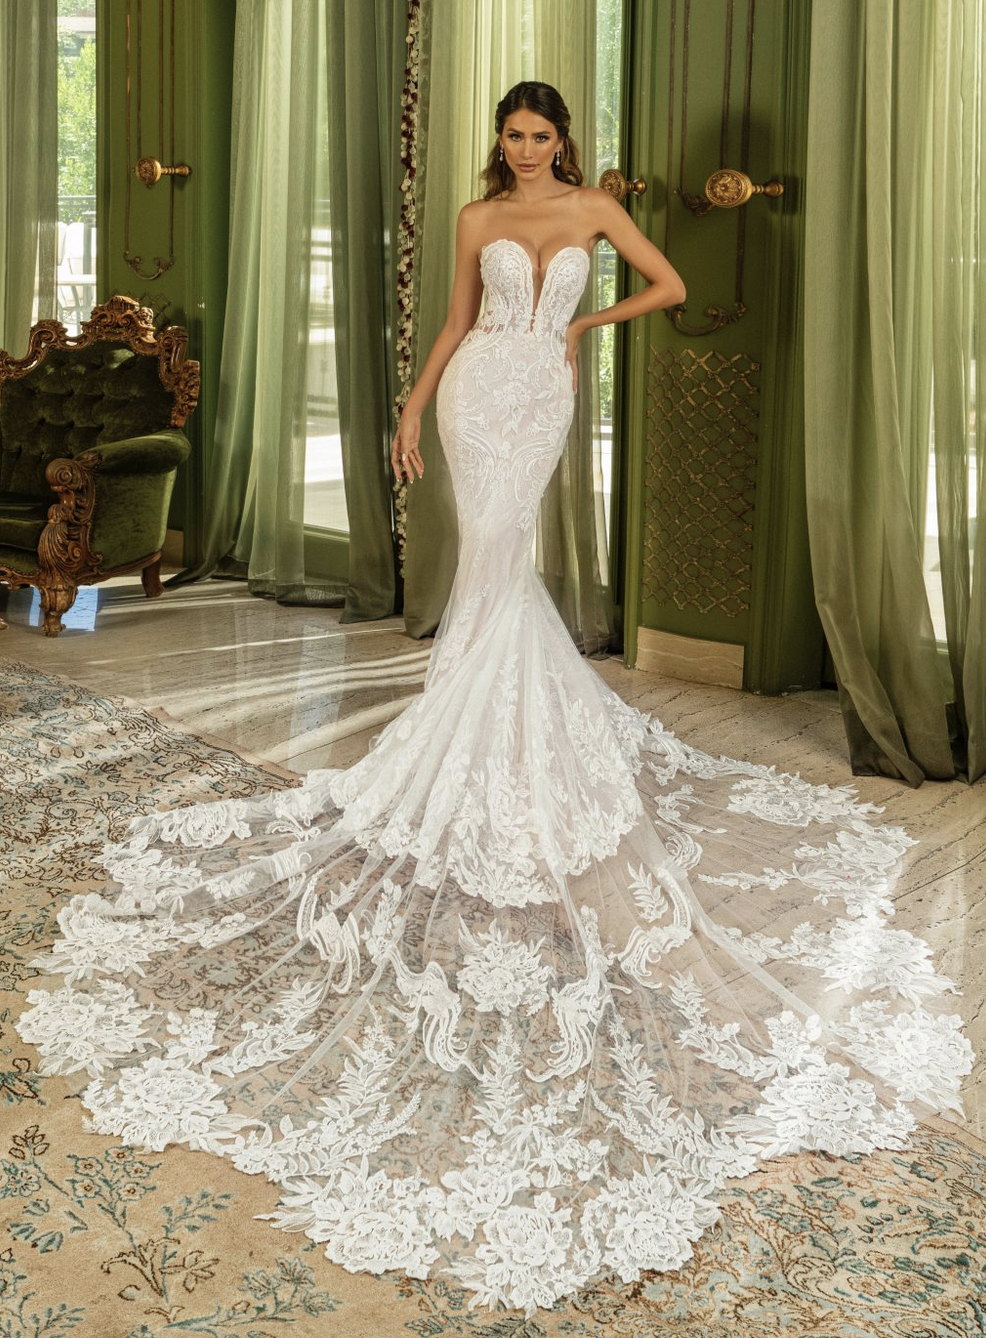 Kitty Chen Aviana lace wedding dress has a fit and flare shape, sweetheart neckline with plunge, and side cutout